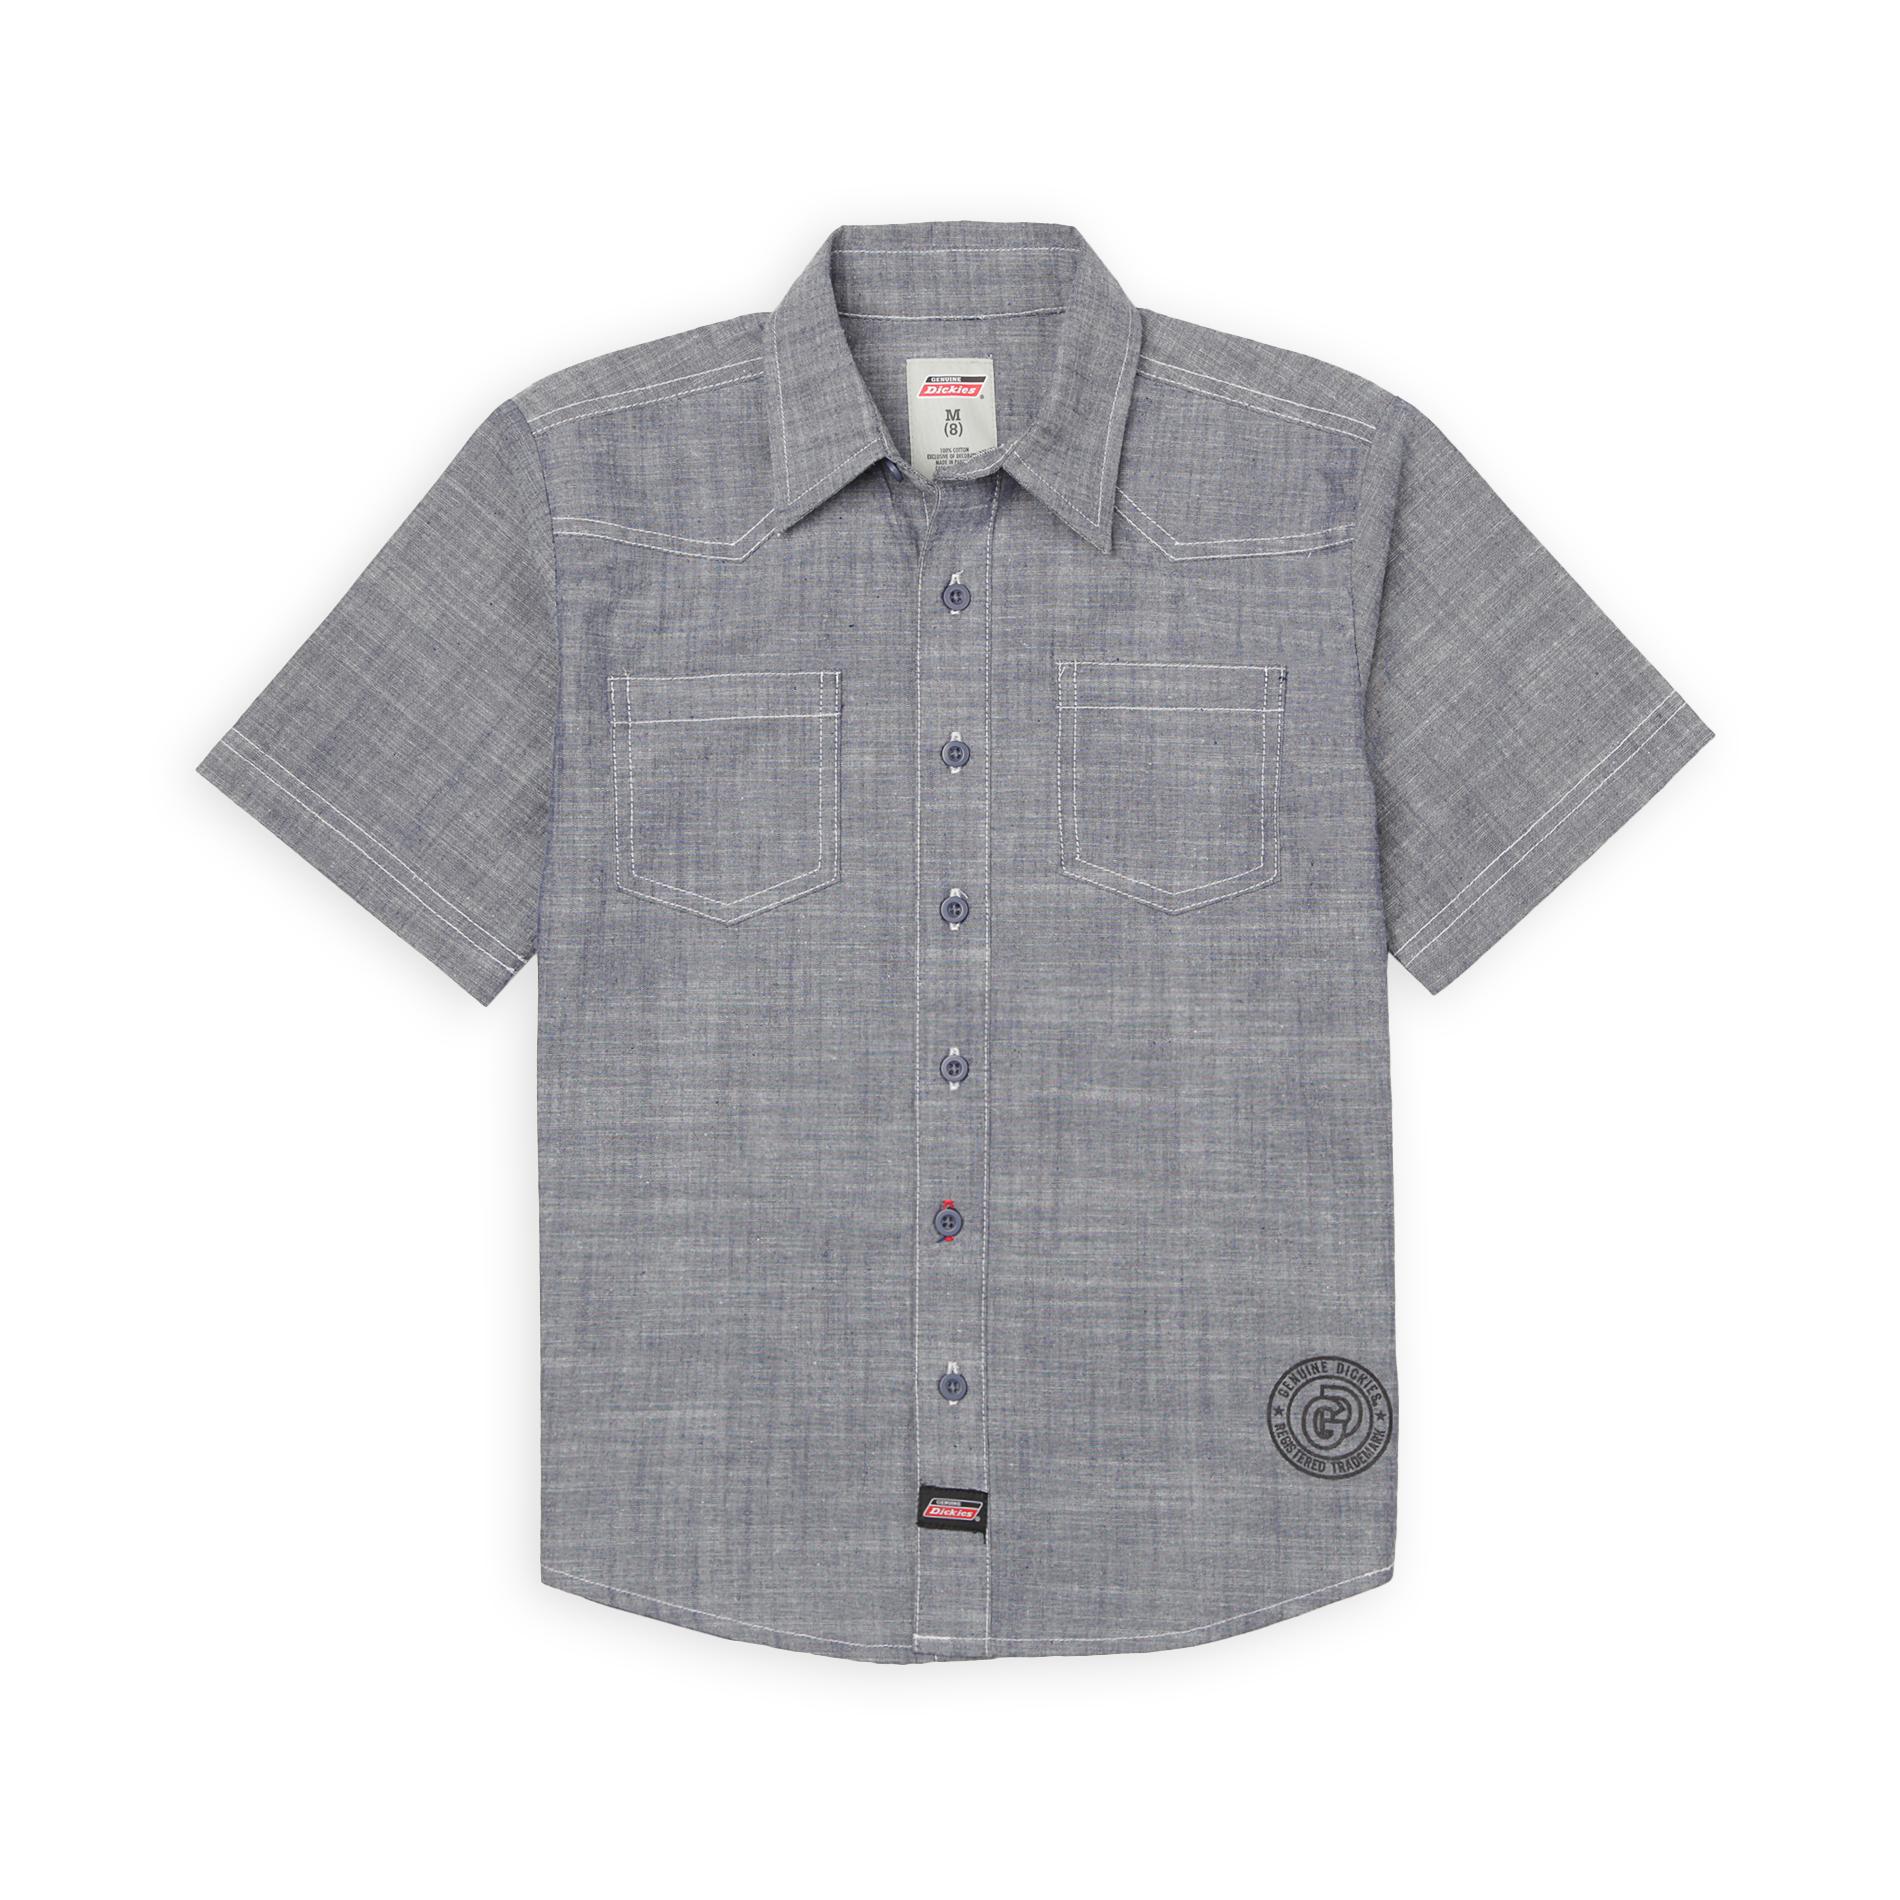 Genuine Dickies Boy's Button-Front Shirt